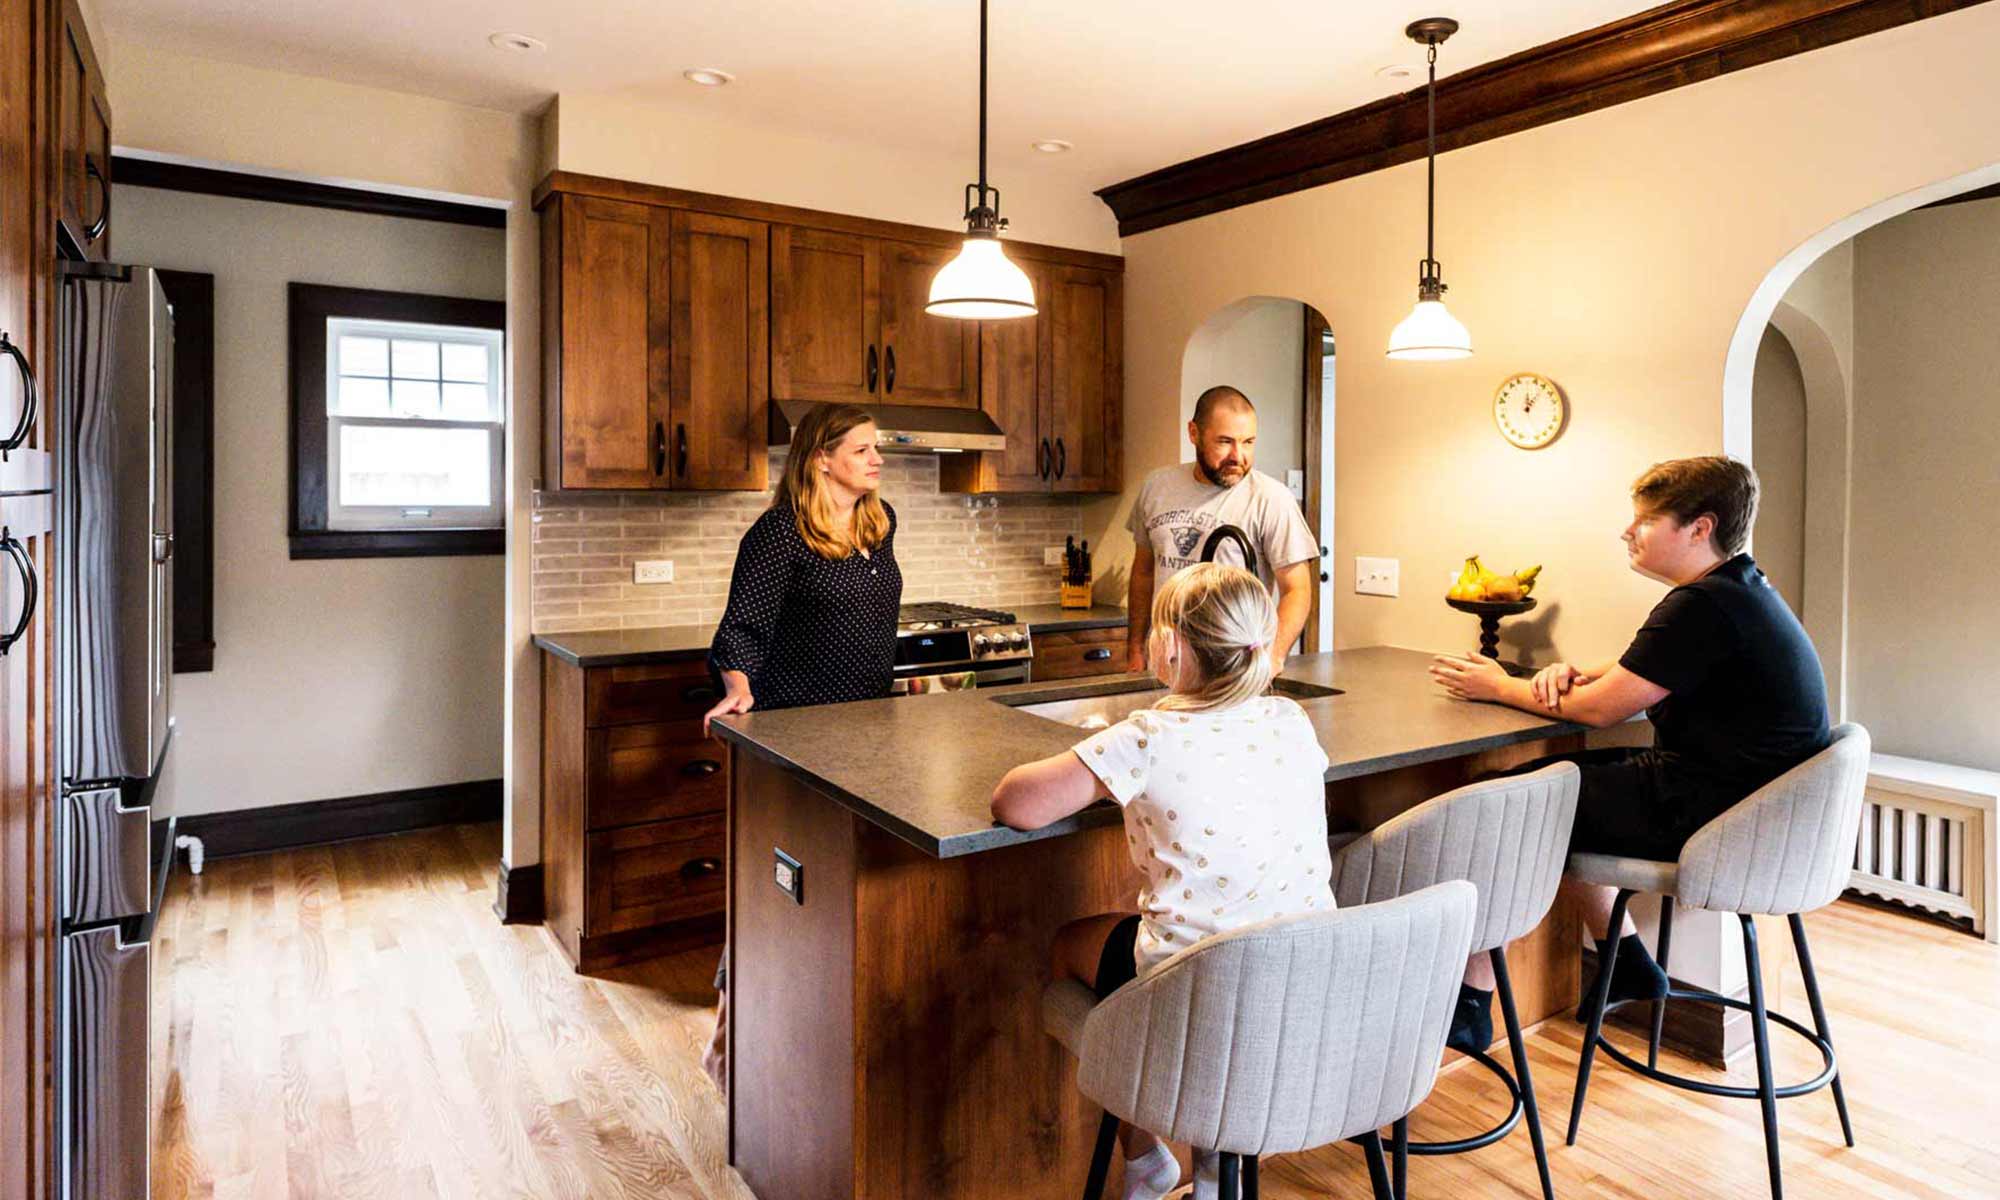 Family gathered in newly remodeled kitchen with dark wood cabinets